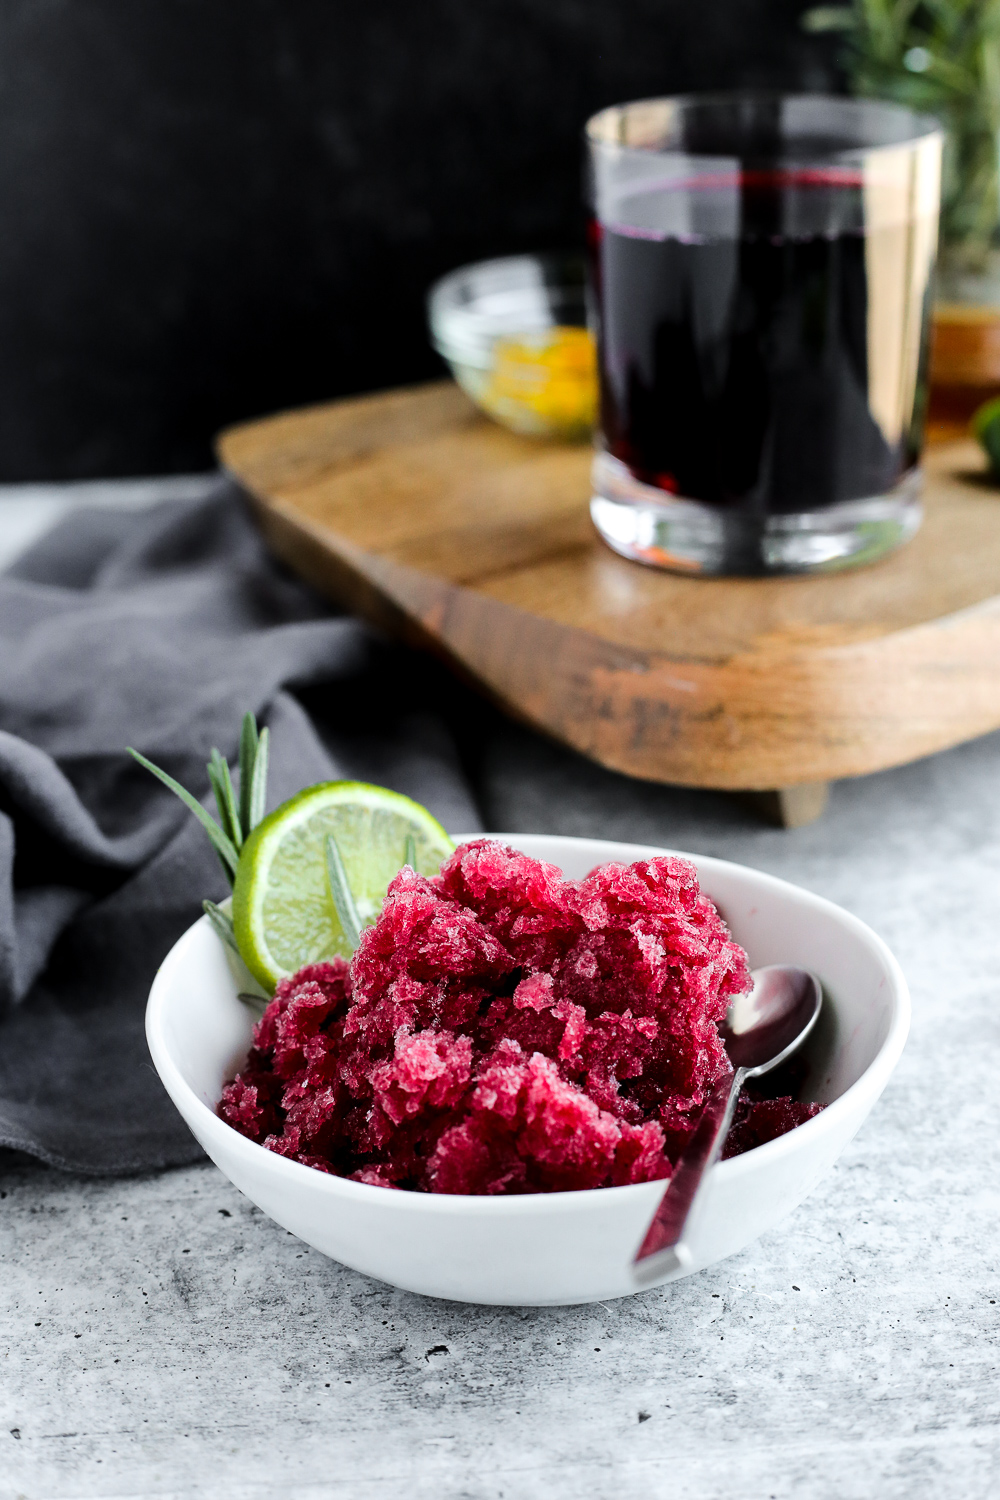 A small white dish with cranberry granita, garnished with sliced lime and a silver spoon, sits in front of a serving tray with a class of cranberry juice